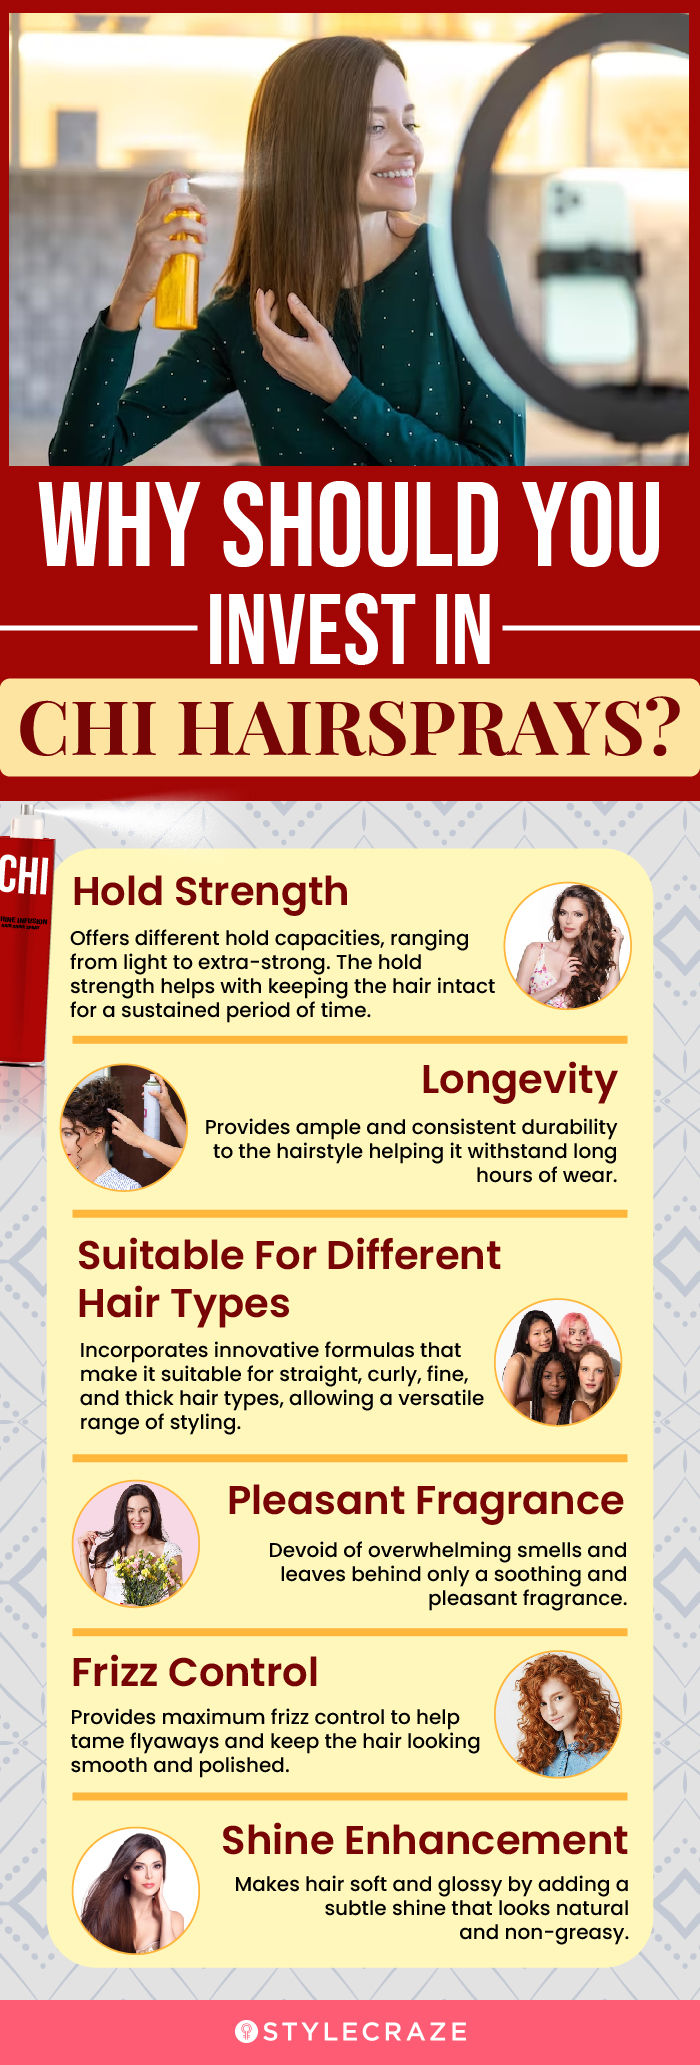 Why Should You Invest In CHI Hairsprays? (infographic)